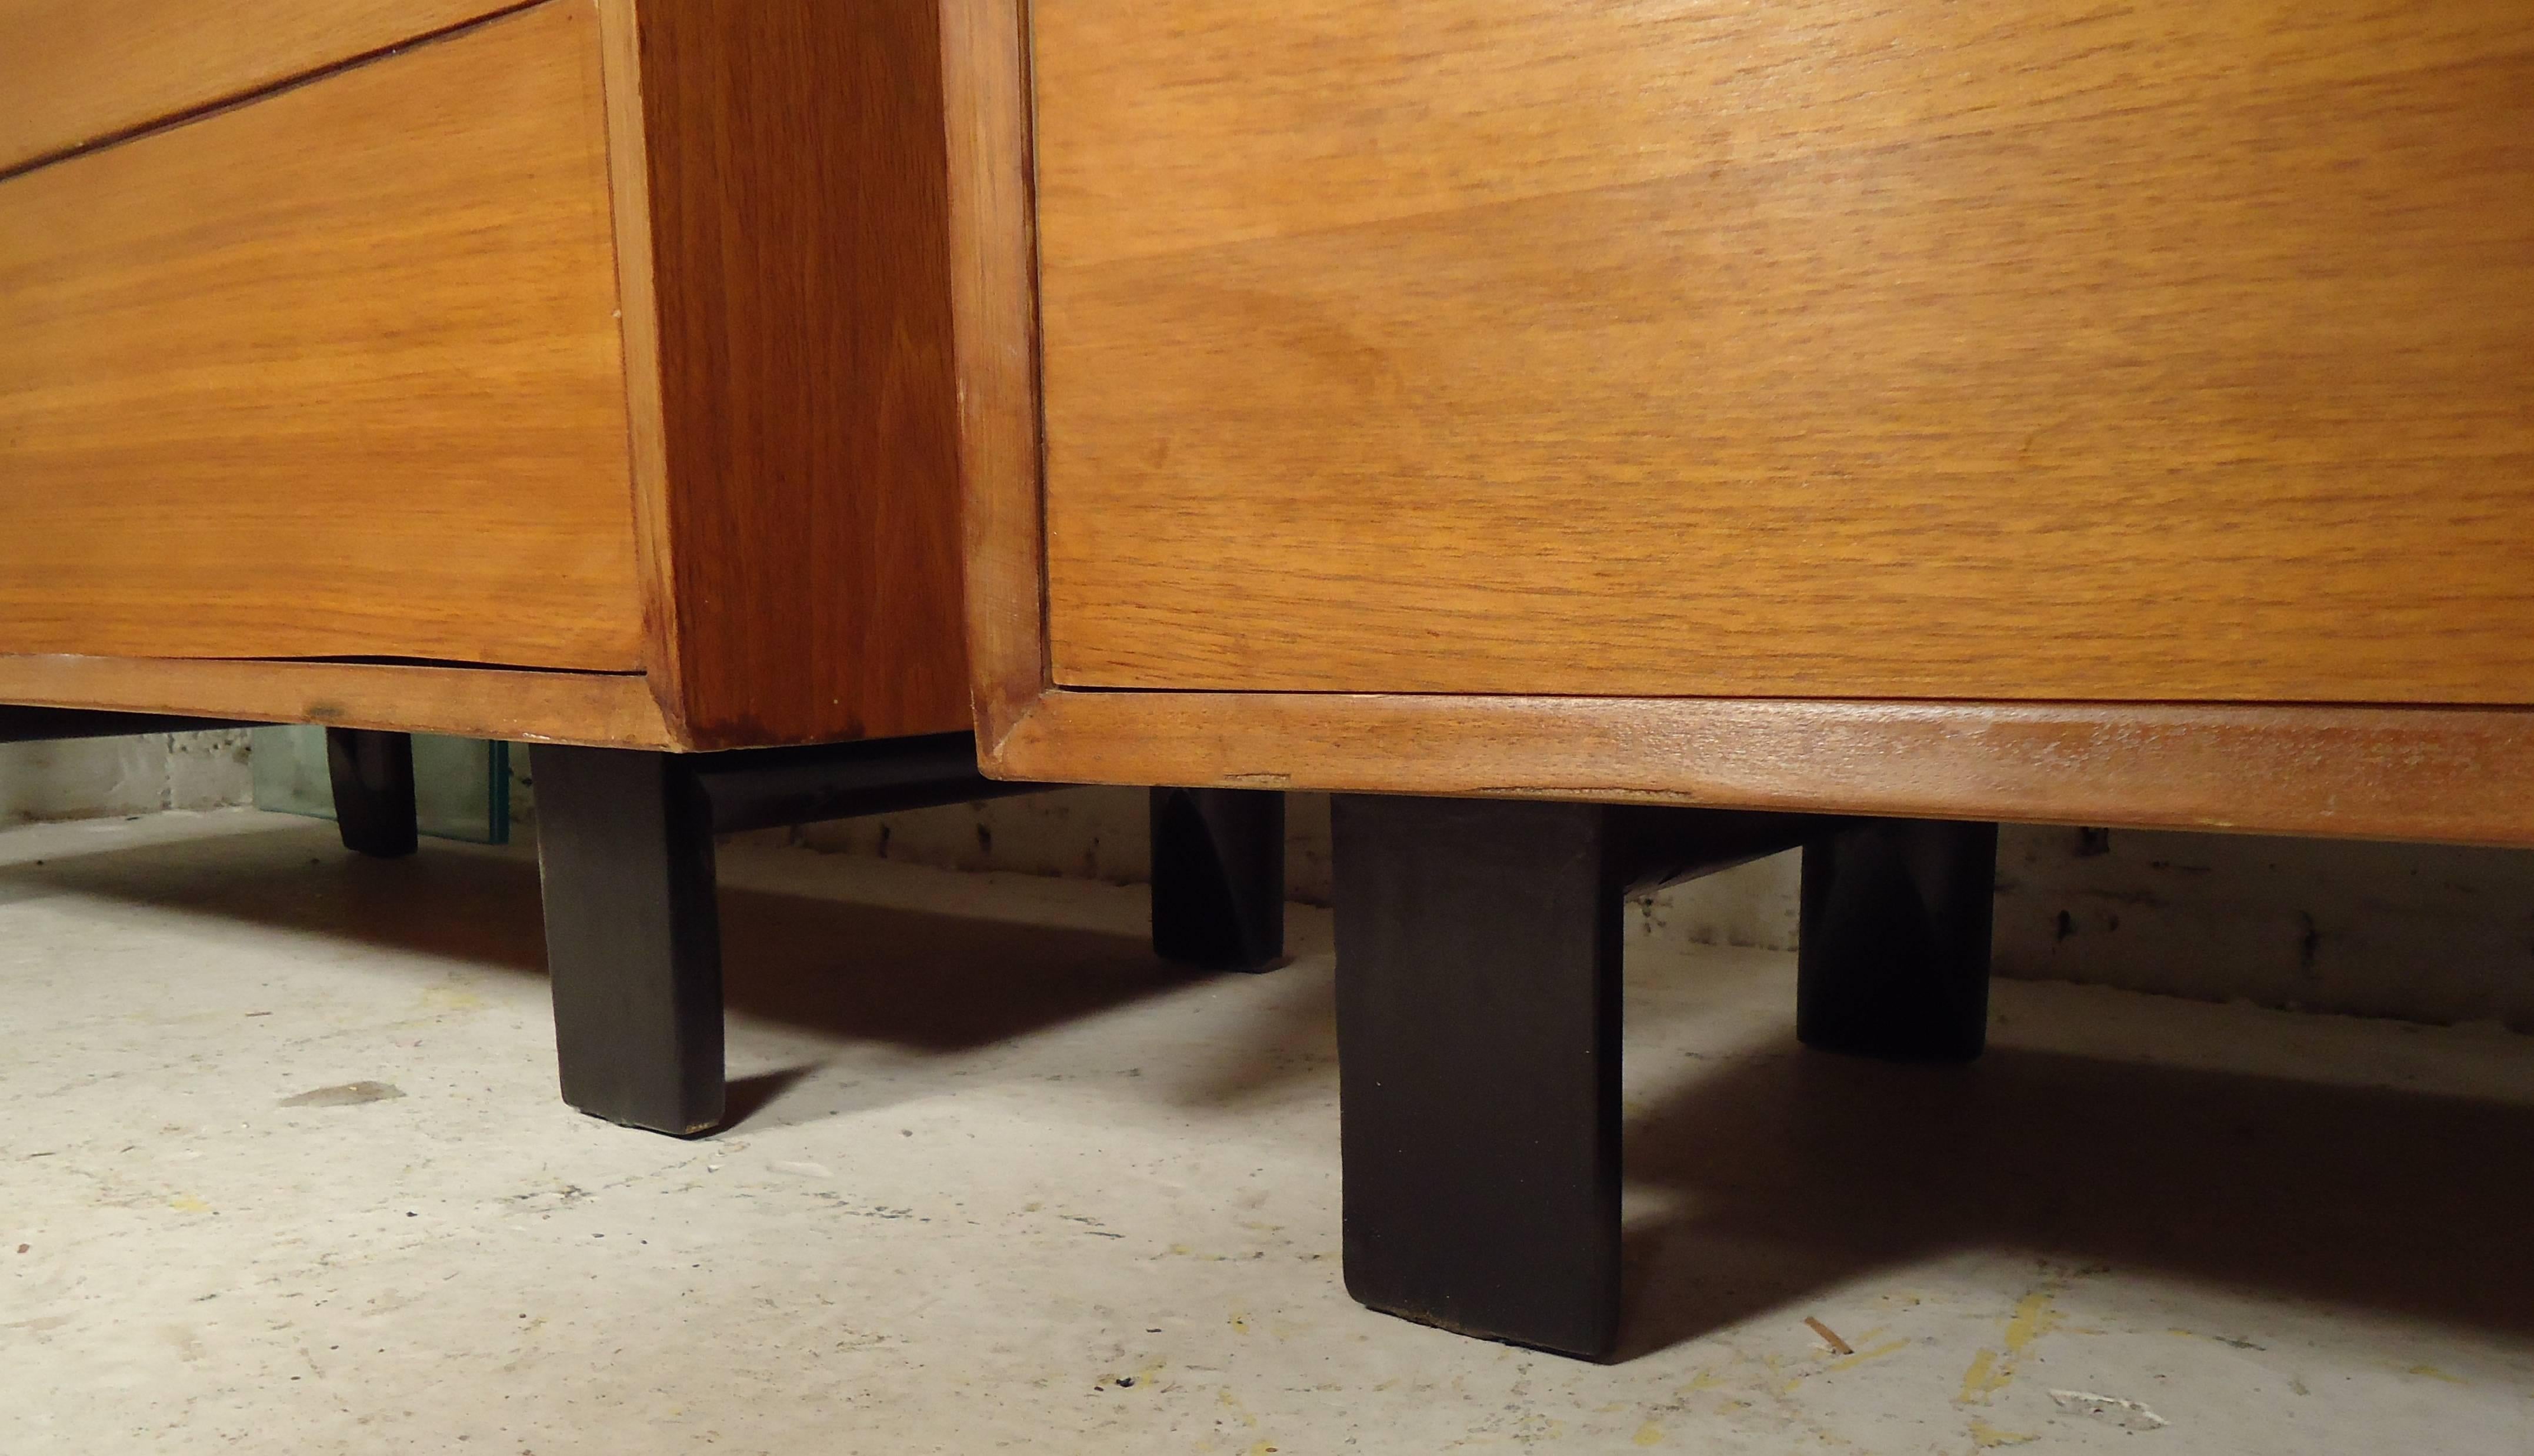 Two vintage-modern five-drawer dressers featuring sculpted chrome handles, designed by George Nelson for Herman Miller.

Please confirm item location NY or NJ with dealer.